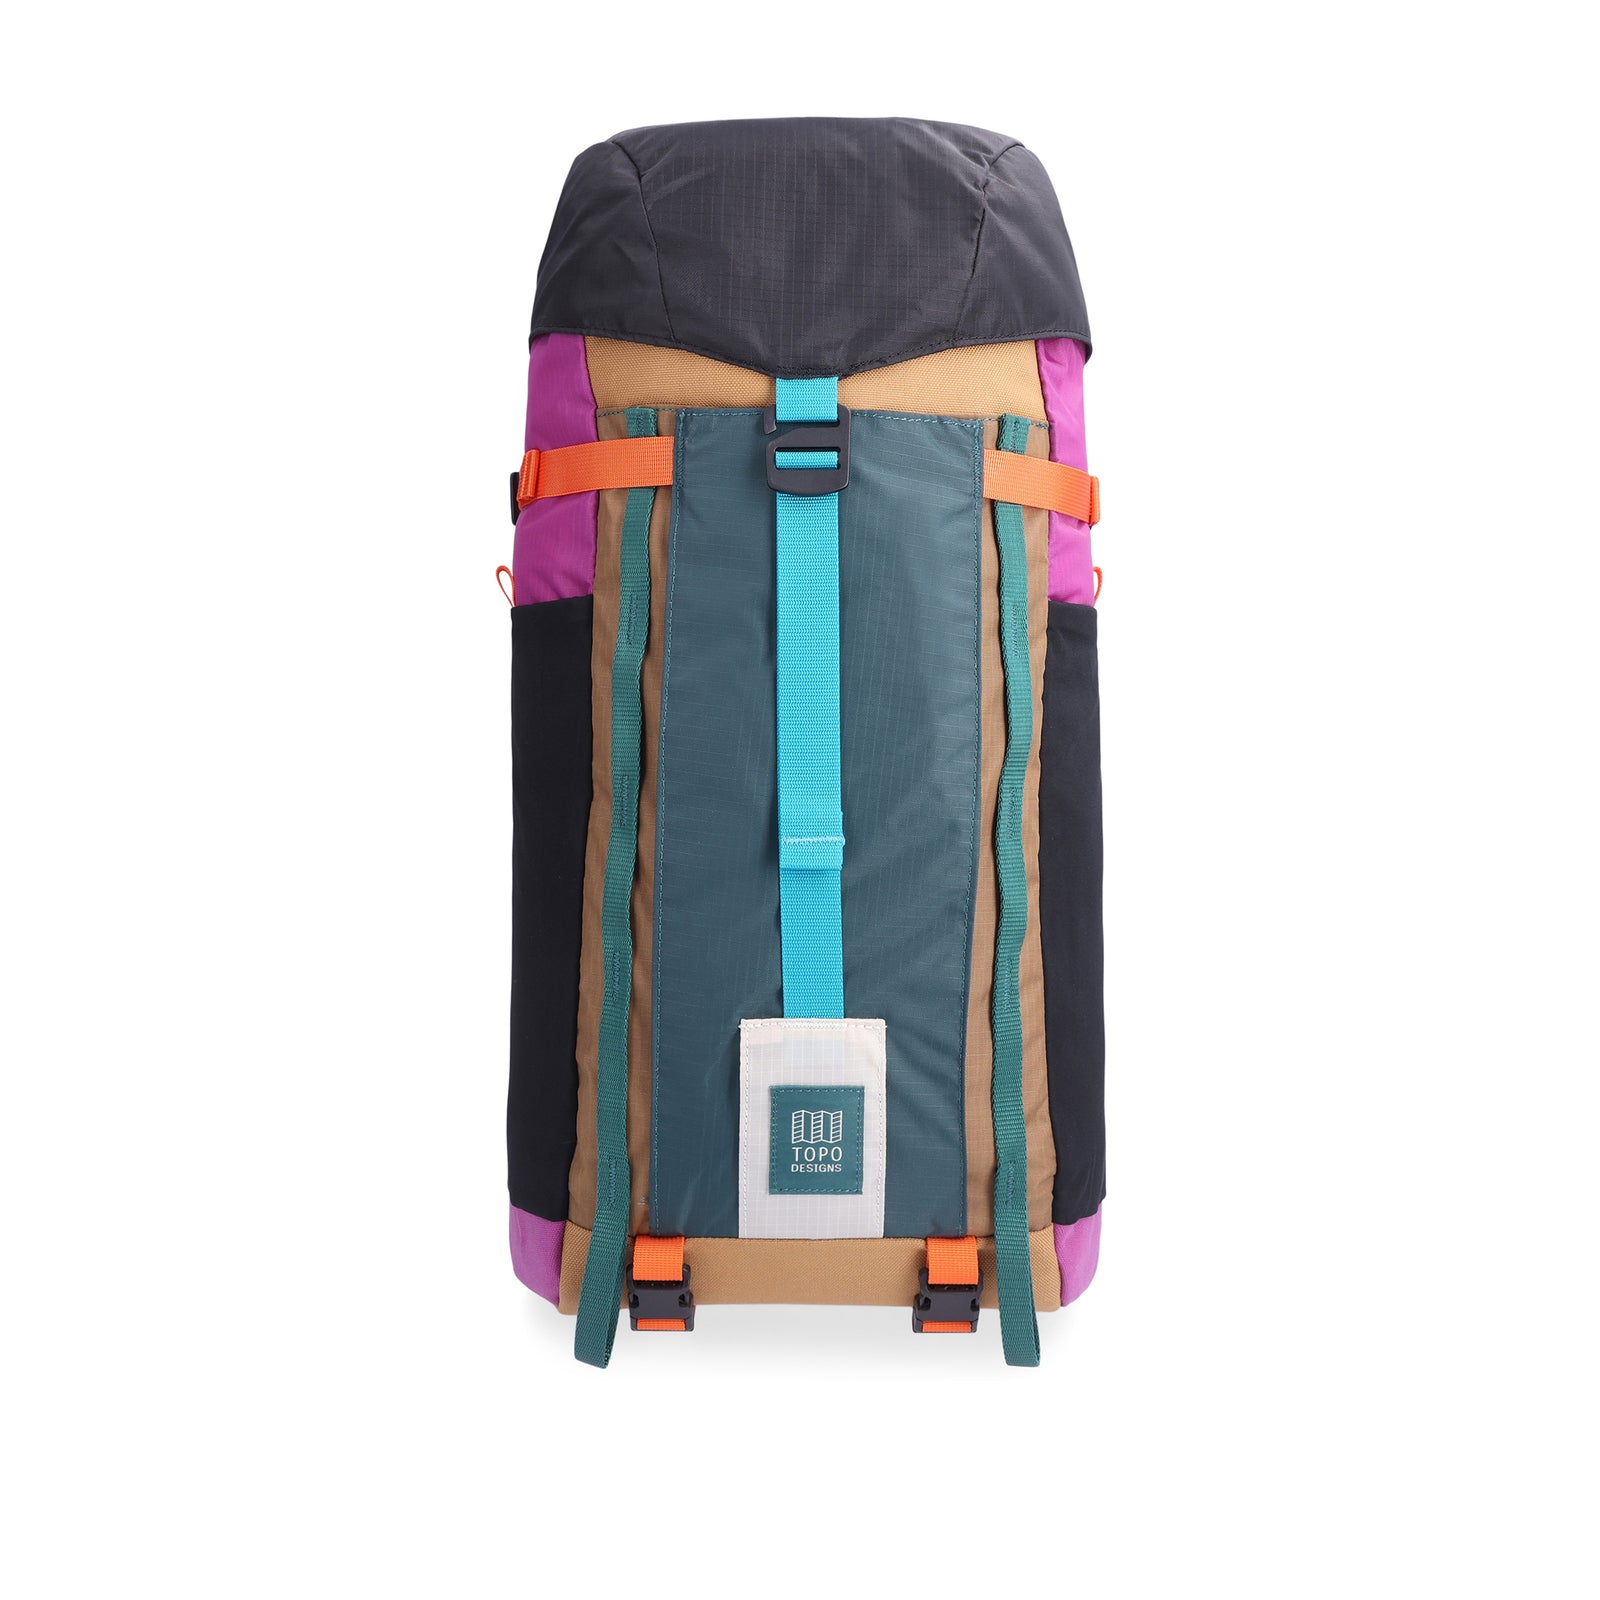 Topo Designs Mountain Pack 16L hiking backpack with internal laptop sleeve in lightweight recycled nylon "Botanic Green / Grape".